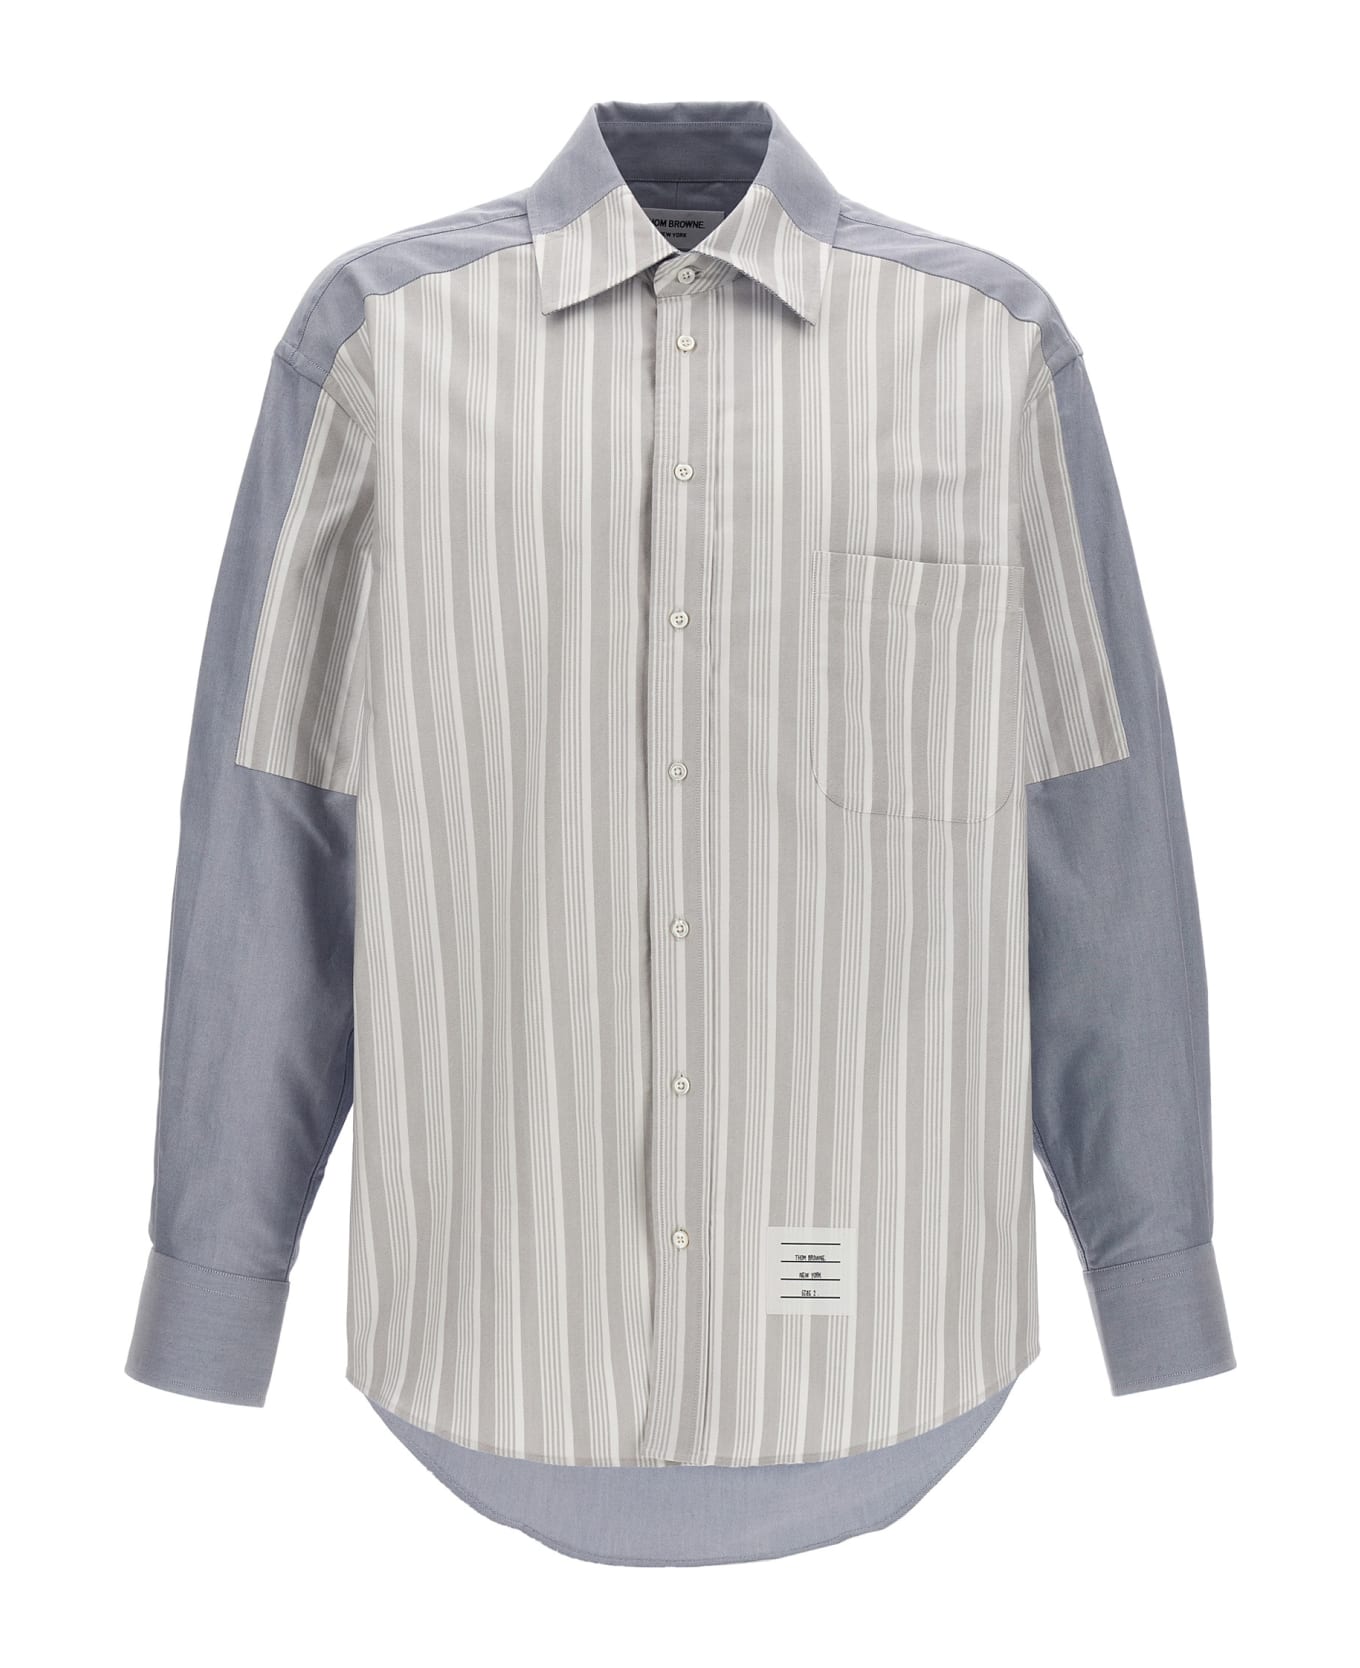 Thom Browne Patchwork Shirt - Multicolor シャツ